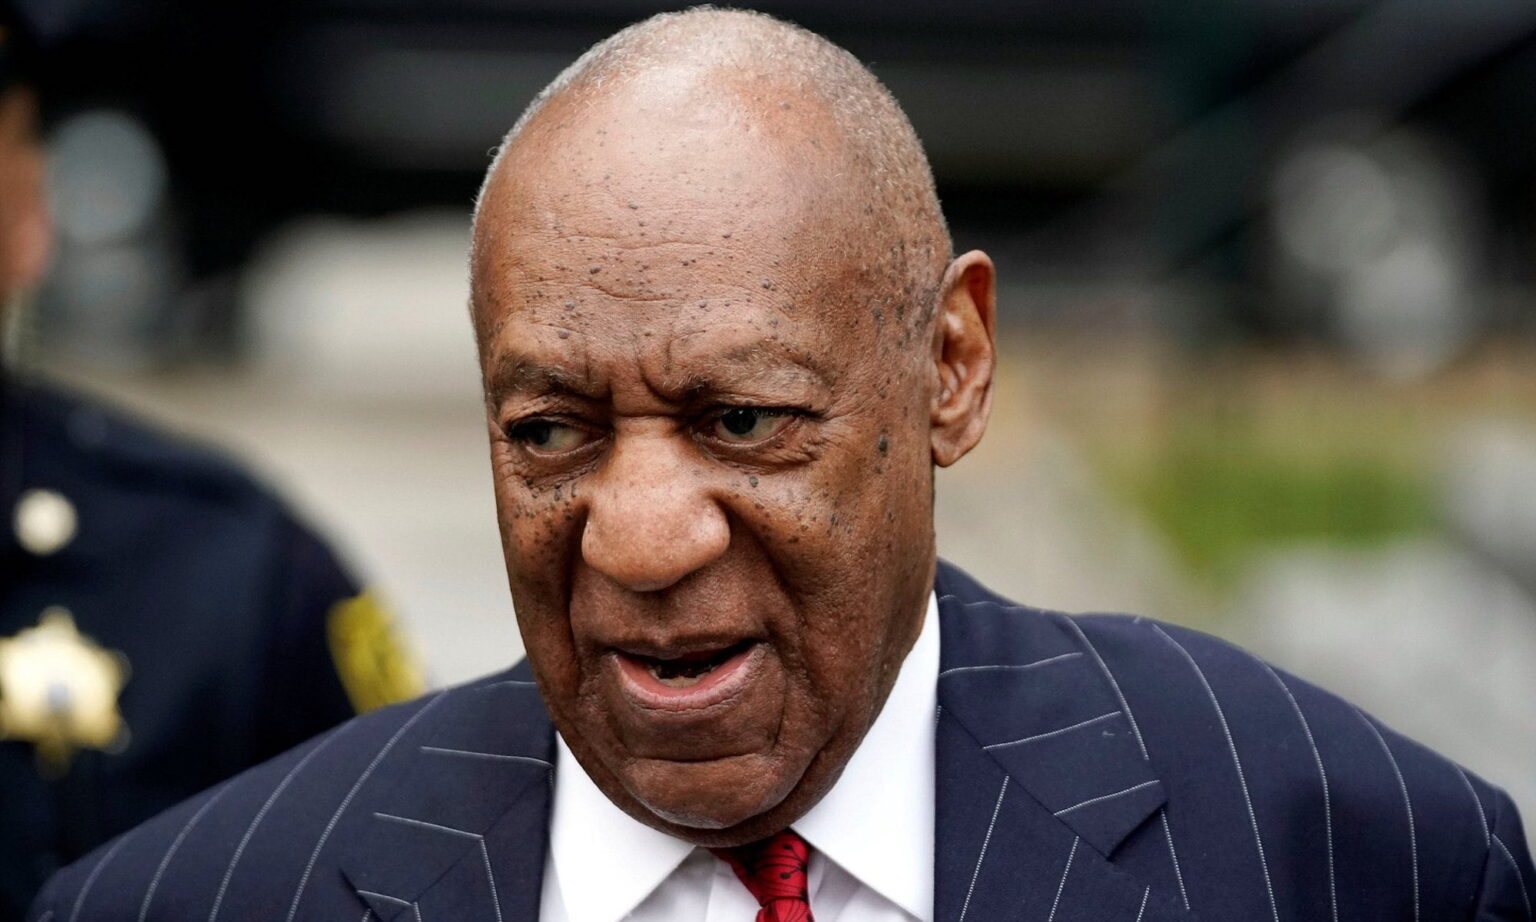 After more than sixty sexual assault allegations and jail time, is the actor still filthy rich? See how much comedian Bill Cosby is worth after his scandal.